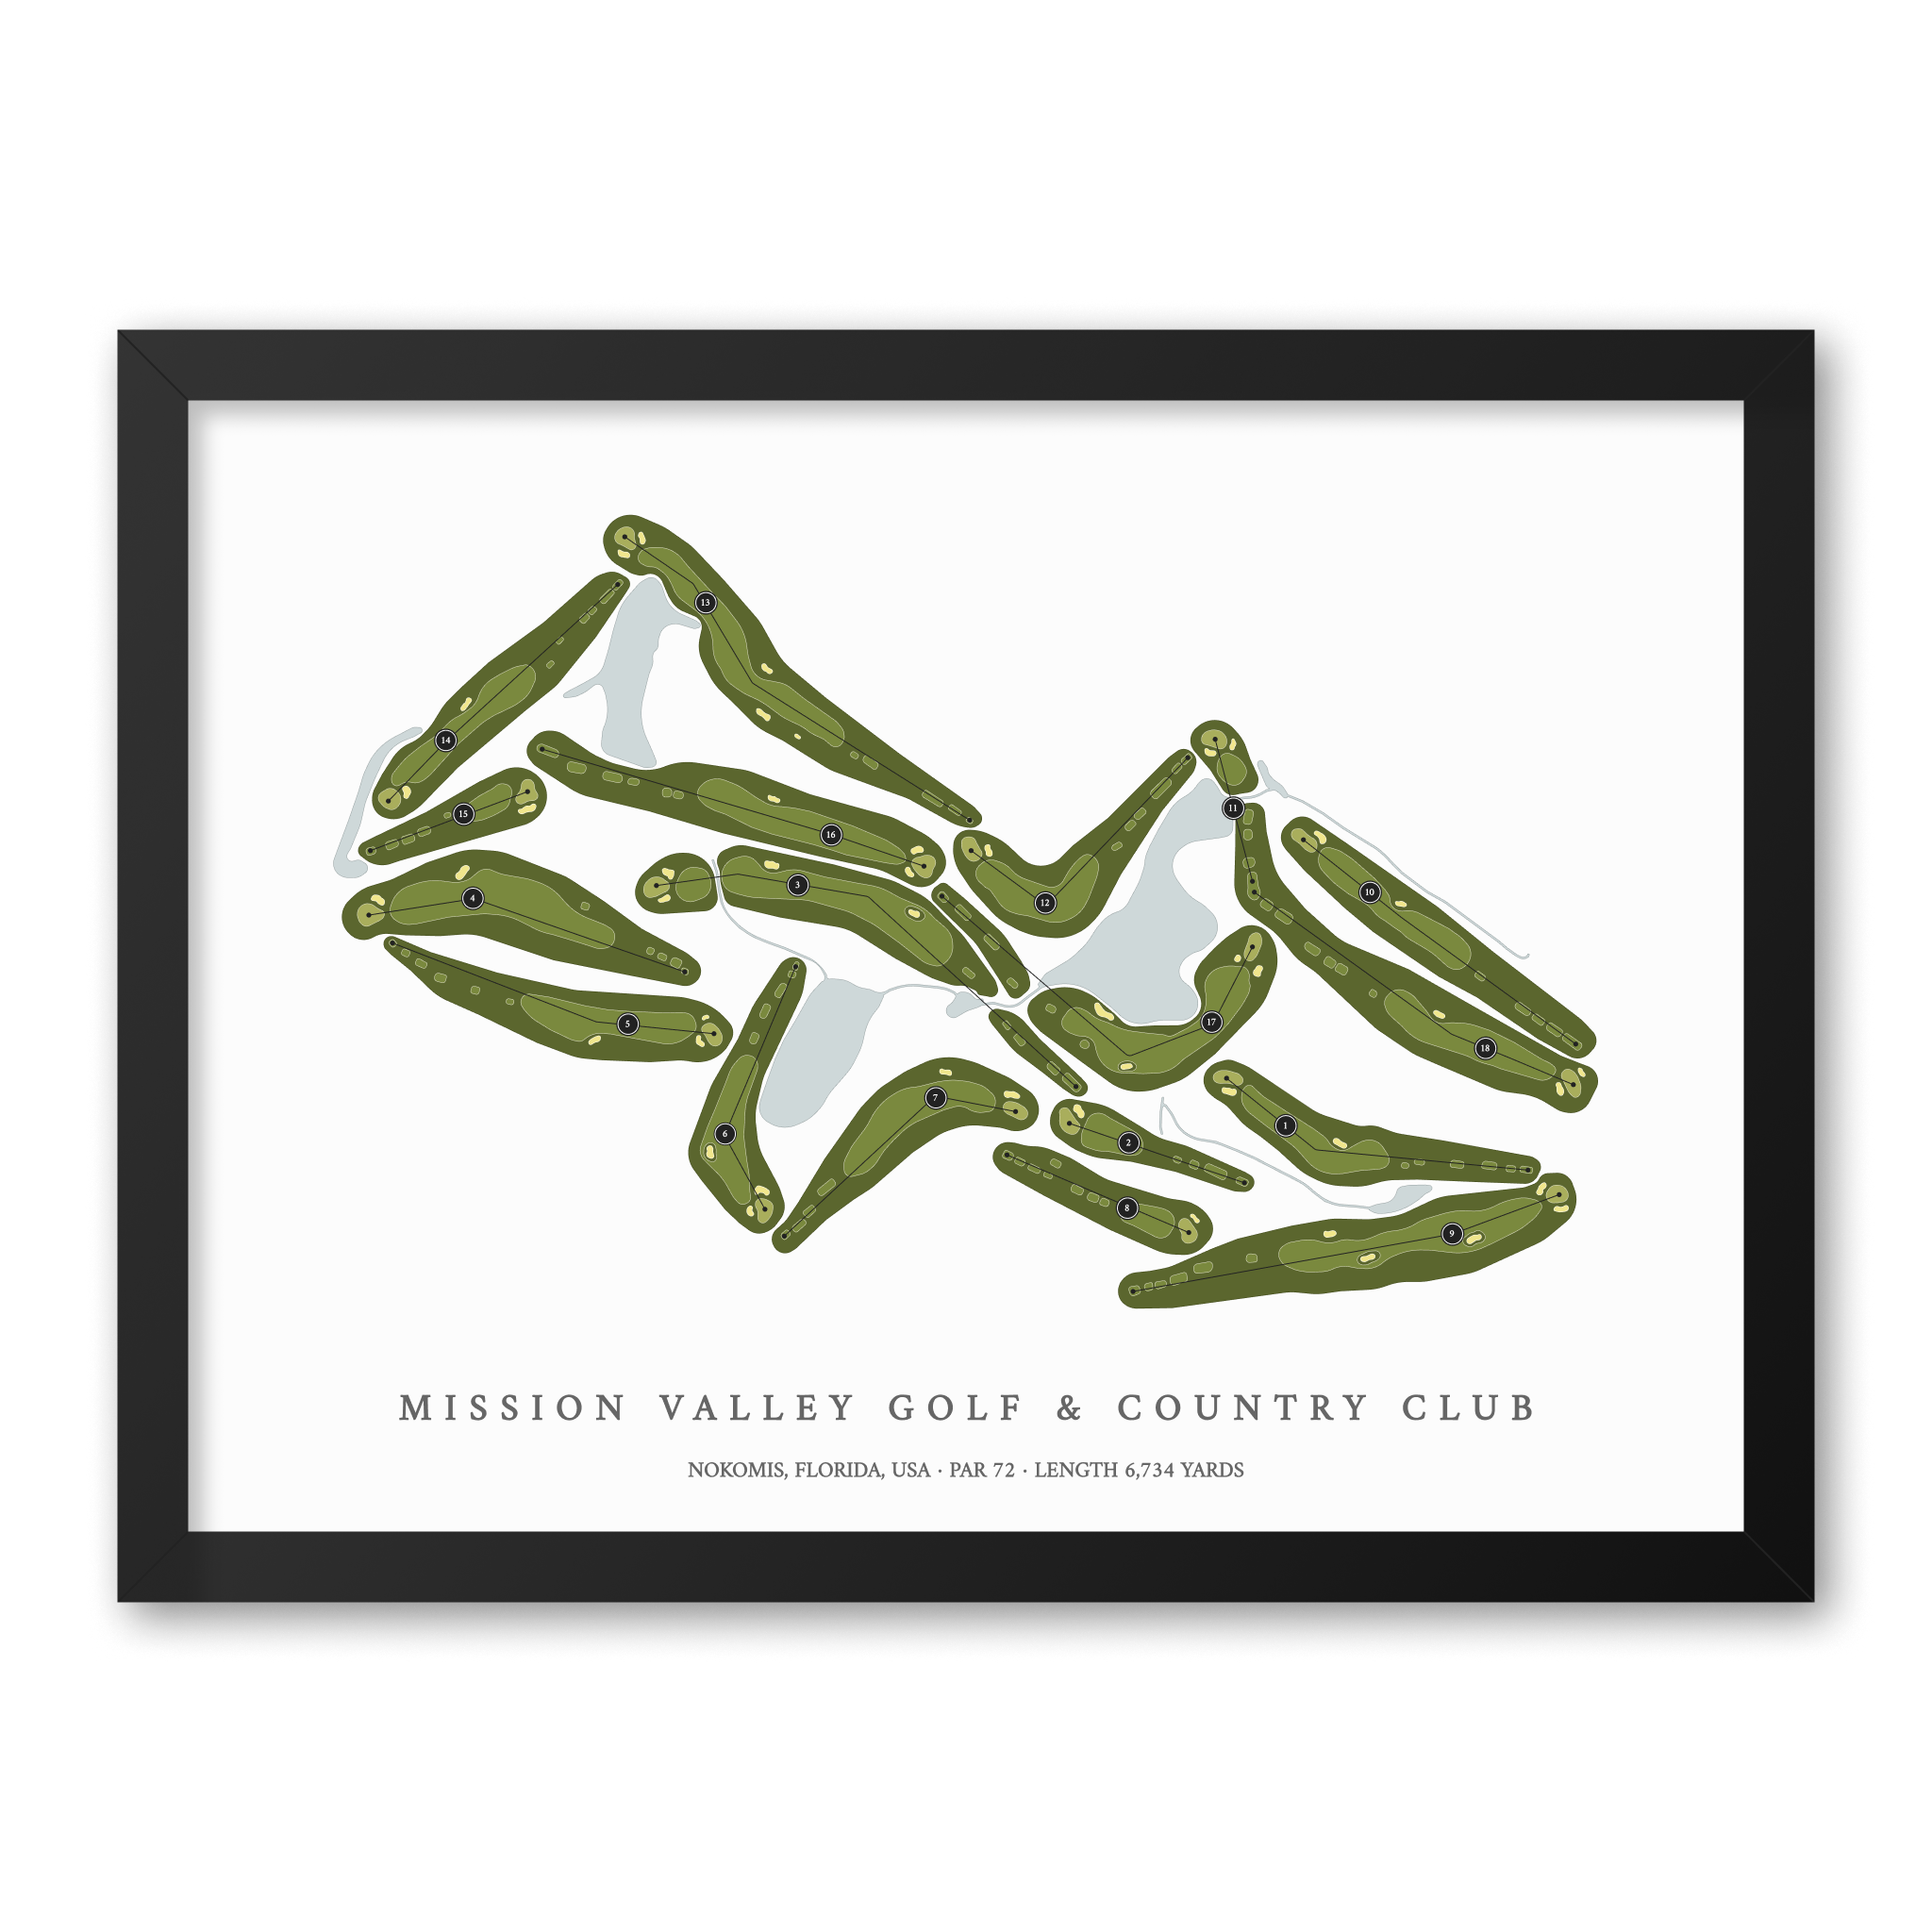 Mission Valley Golf & Country Club | Golf Course Map | Black Frame